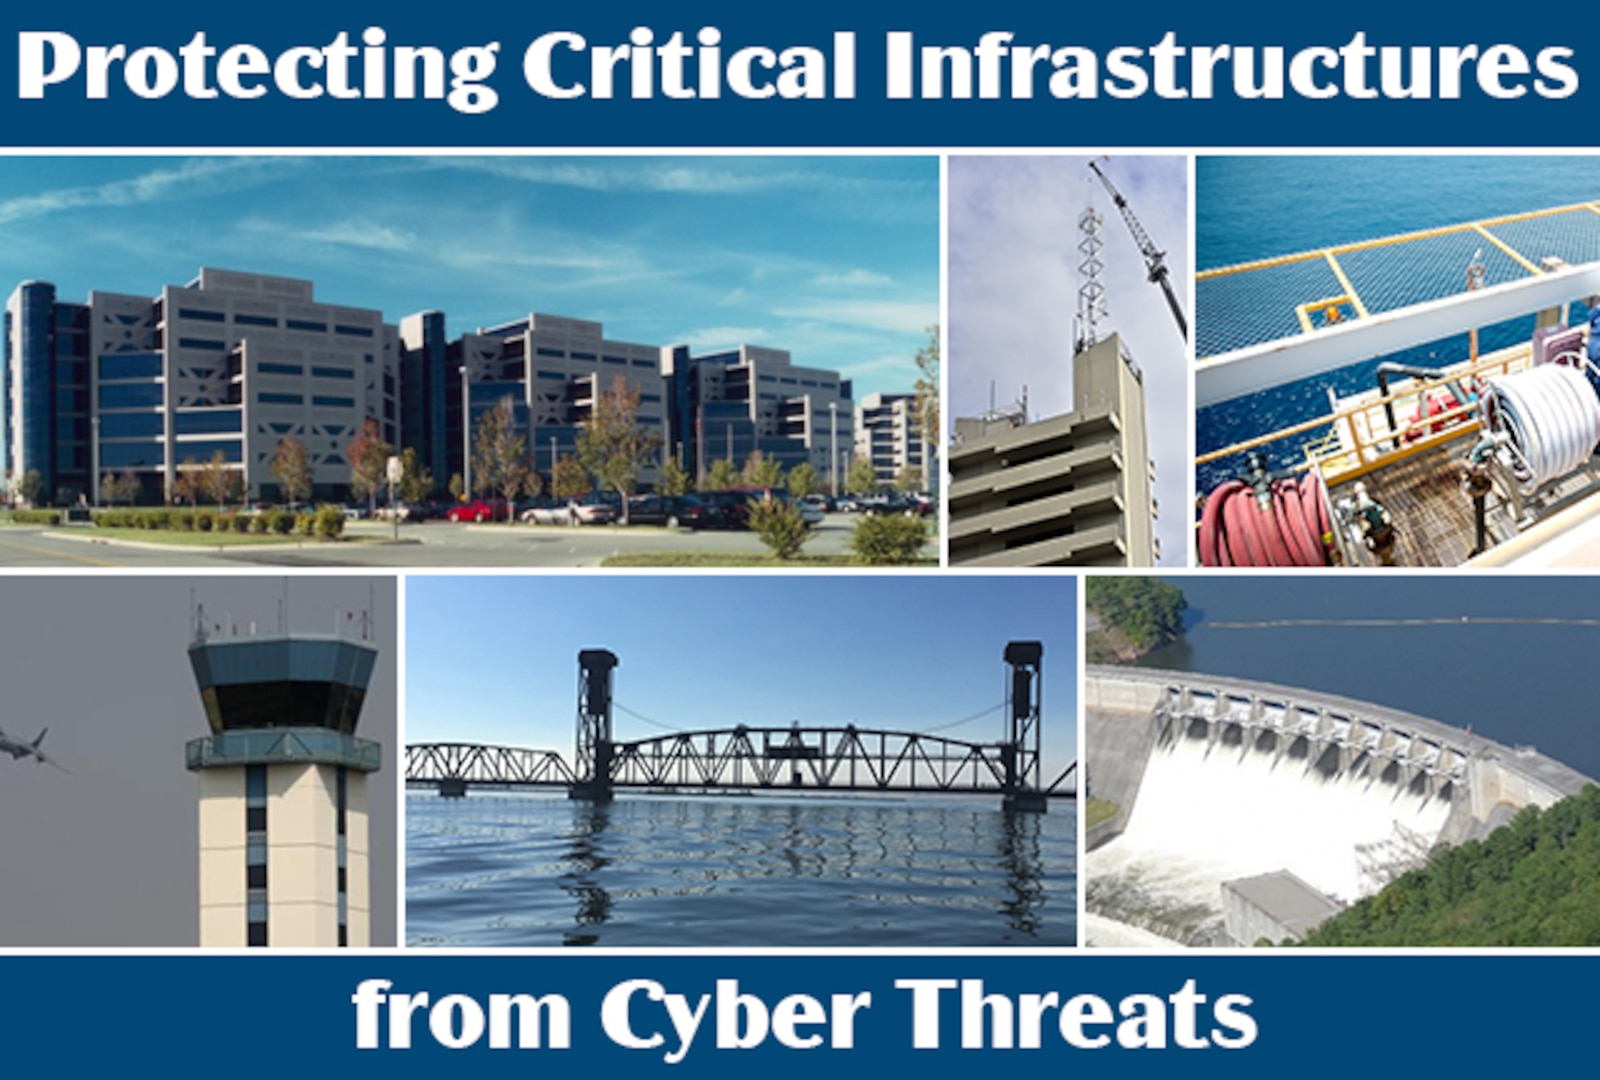 Protecting Critical Infrastructure from Cyber Threats
Information Technology (IT) systems